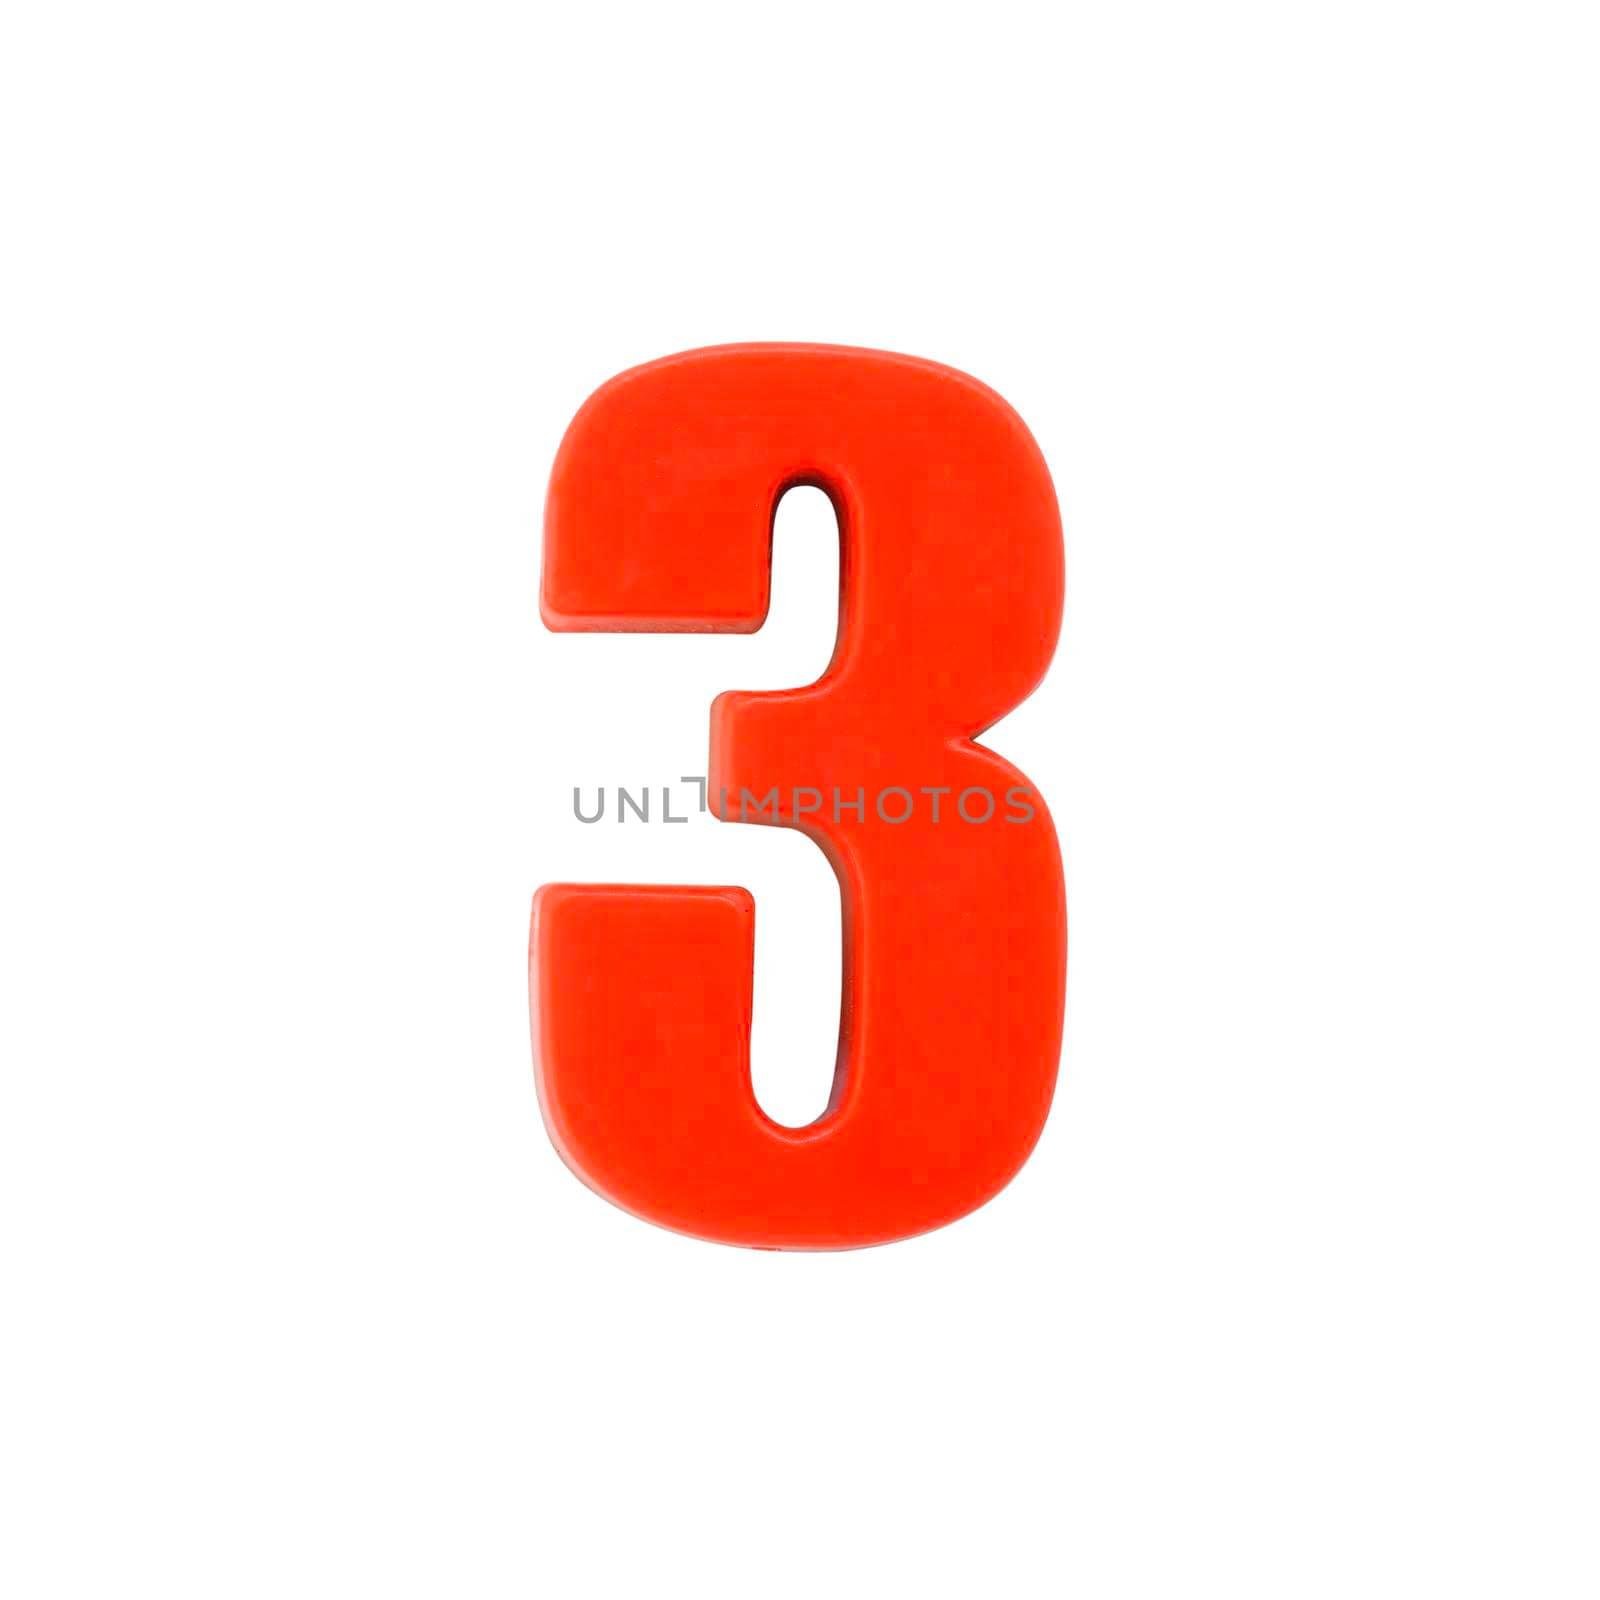 Shot of a number three made of red plastic with clipping path by stoonn